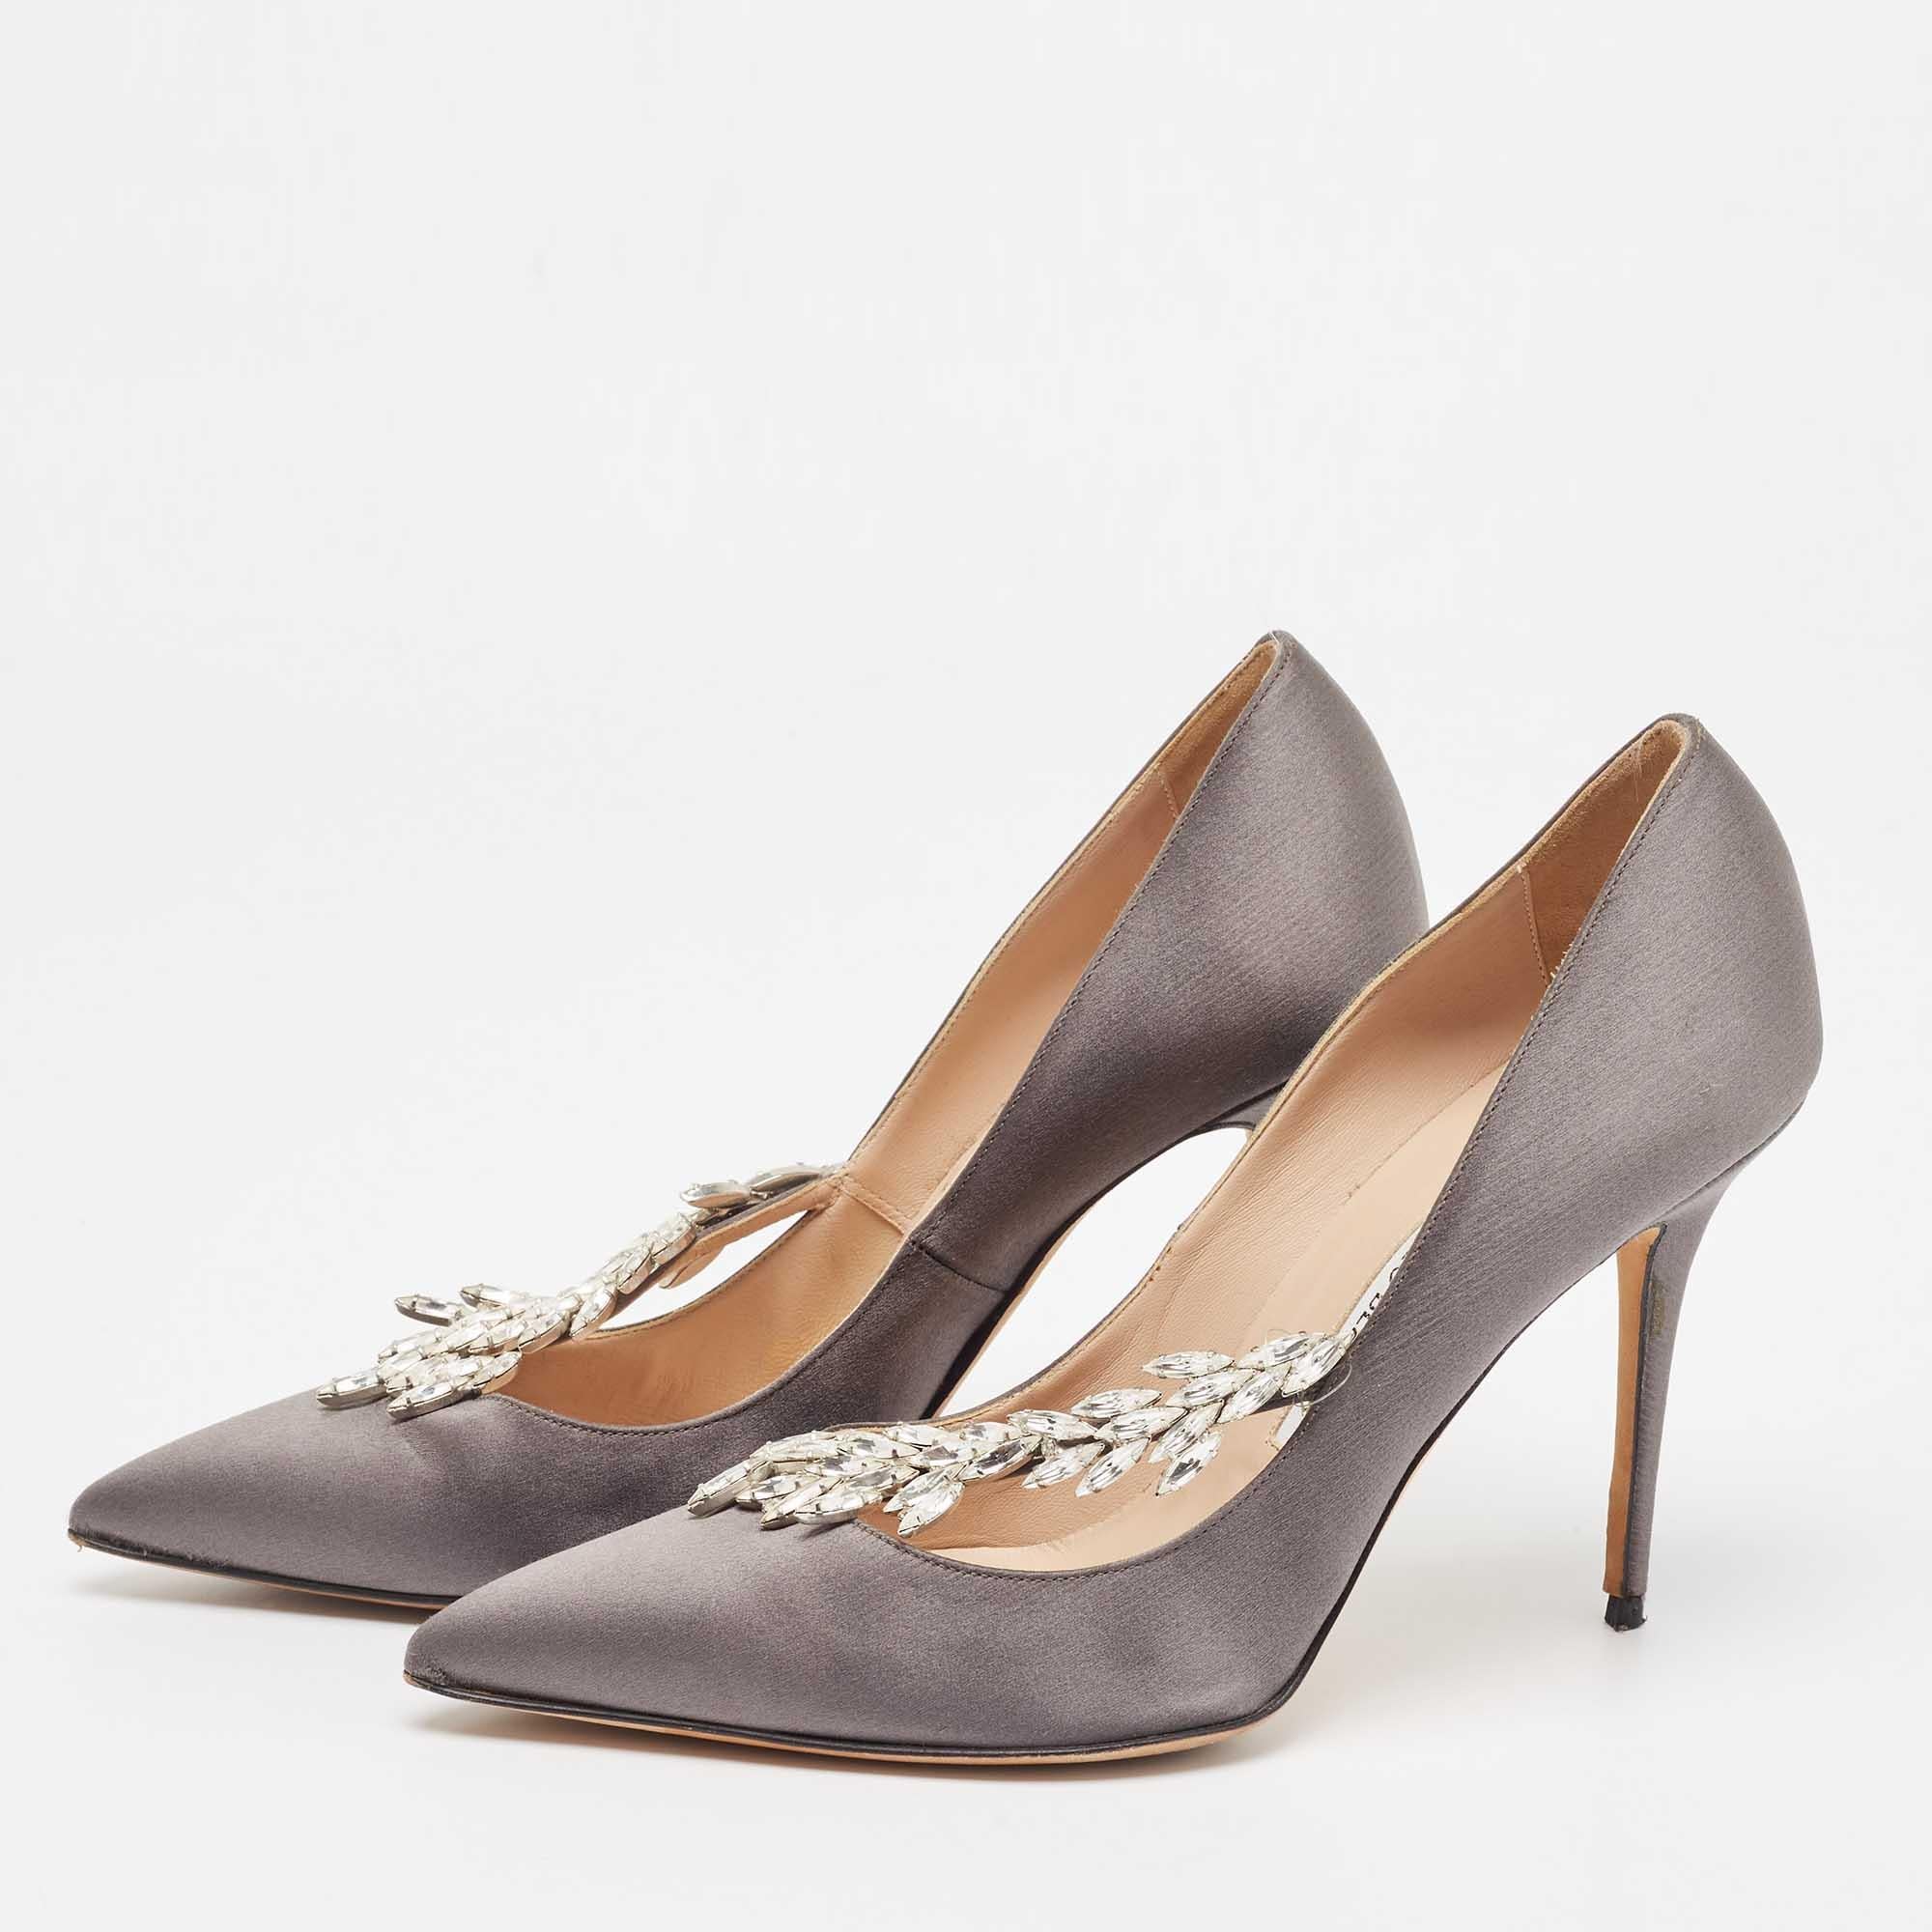 Crafted in a classy hue, we love these Manolo Blahnik grey pumps. Designed to make a statement, they have a sleek silhouette and a nice fit. Wear yours under maxi skirts for a peek of glamour, or let them shine with cropped hemlines.

